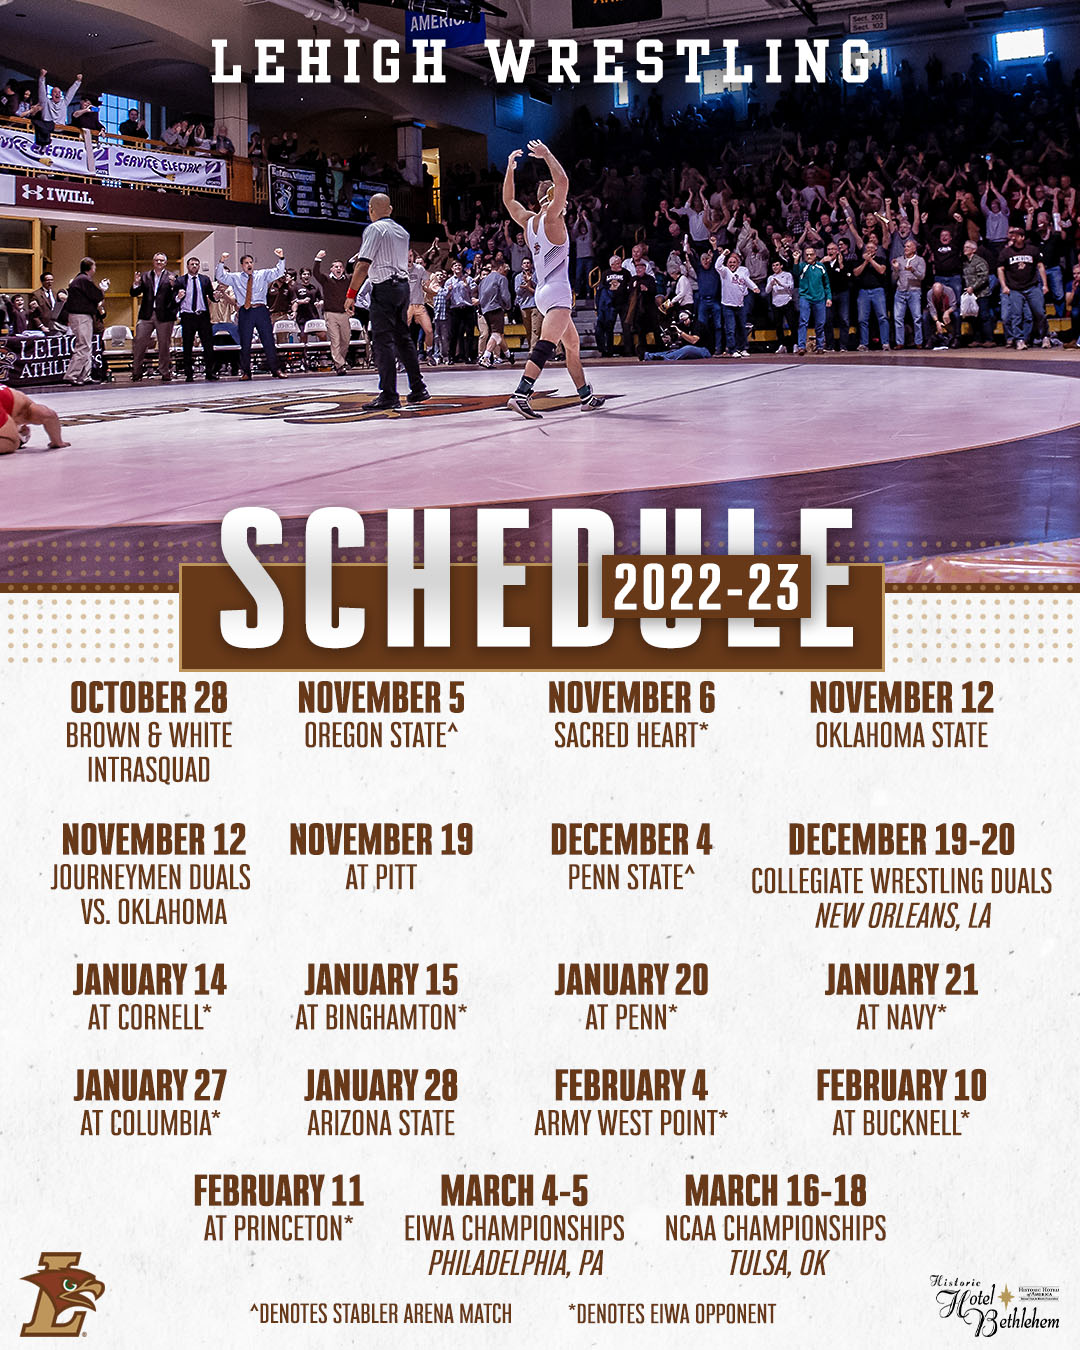 Lehigh Wrestling on Twitter "🚨 SCHEDULE DROP 🚨 We've announced our